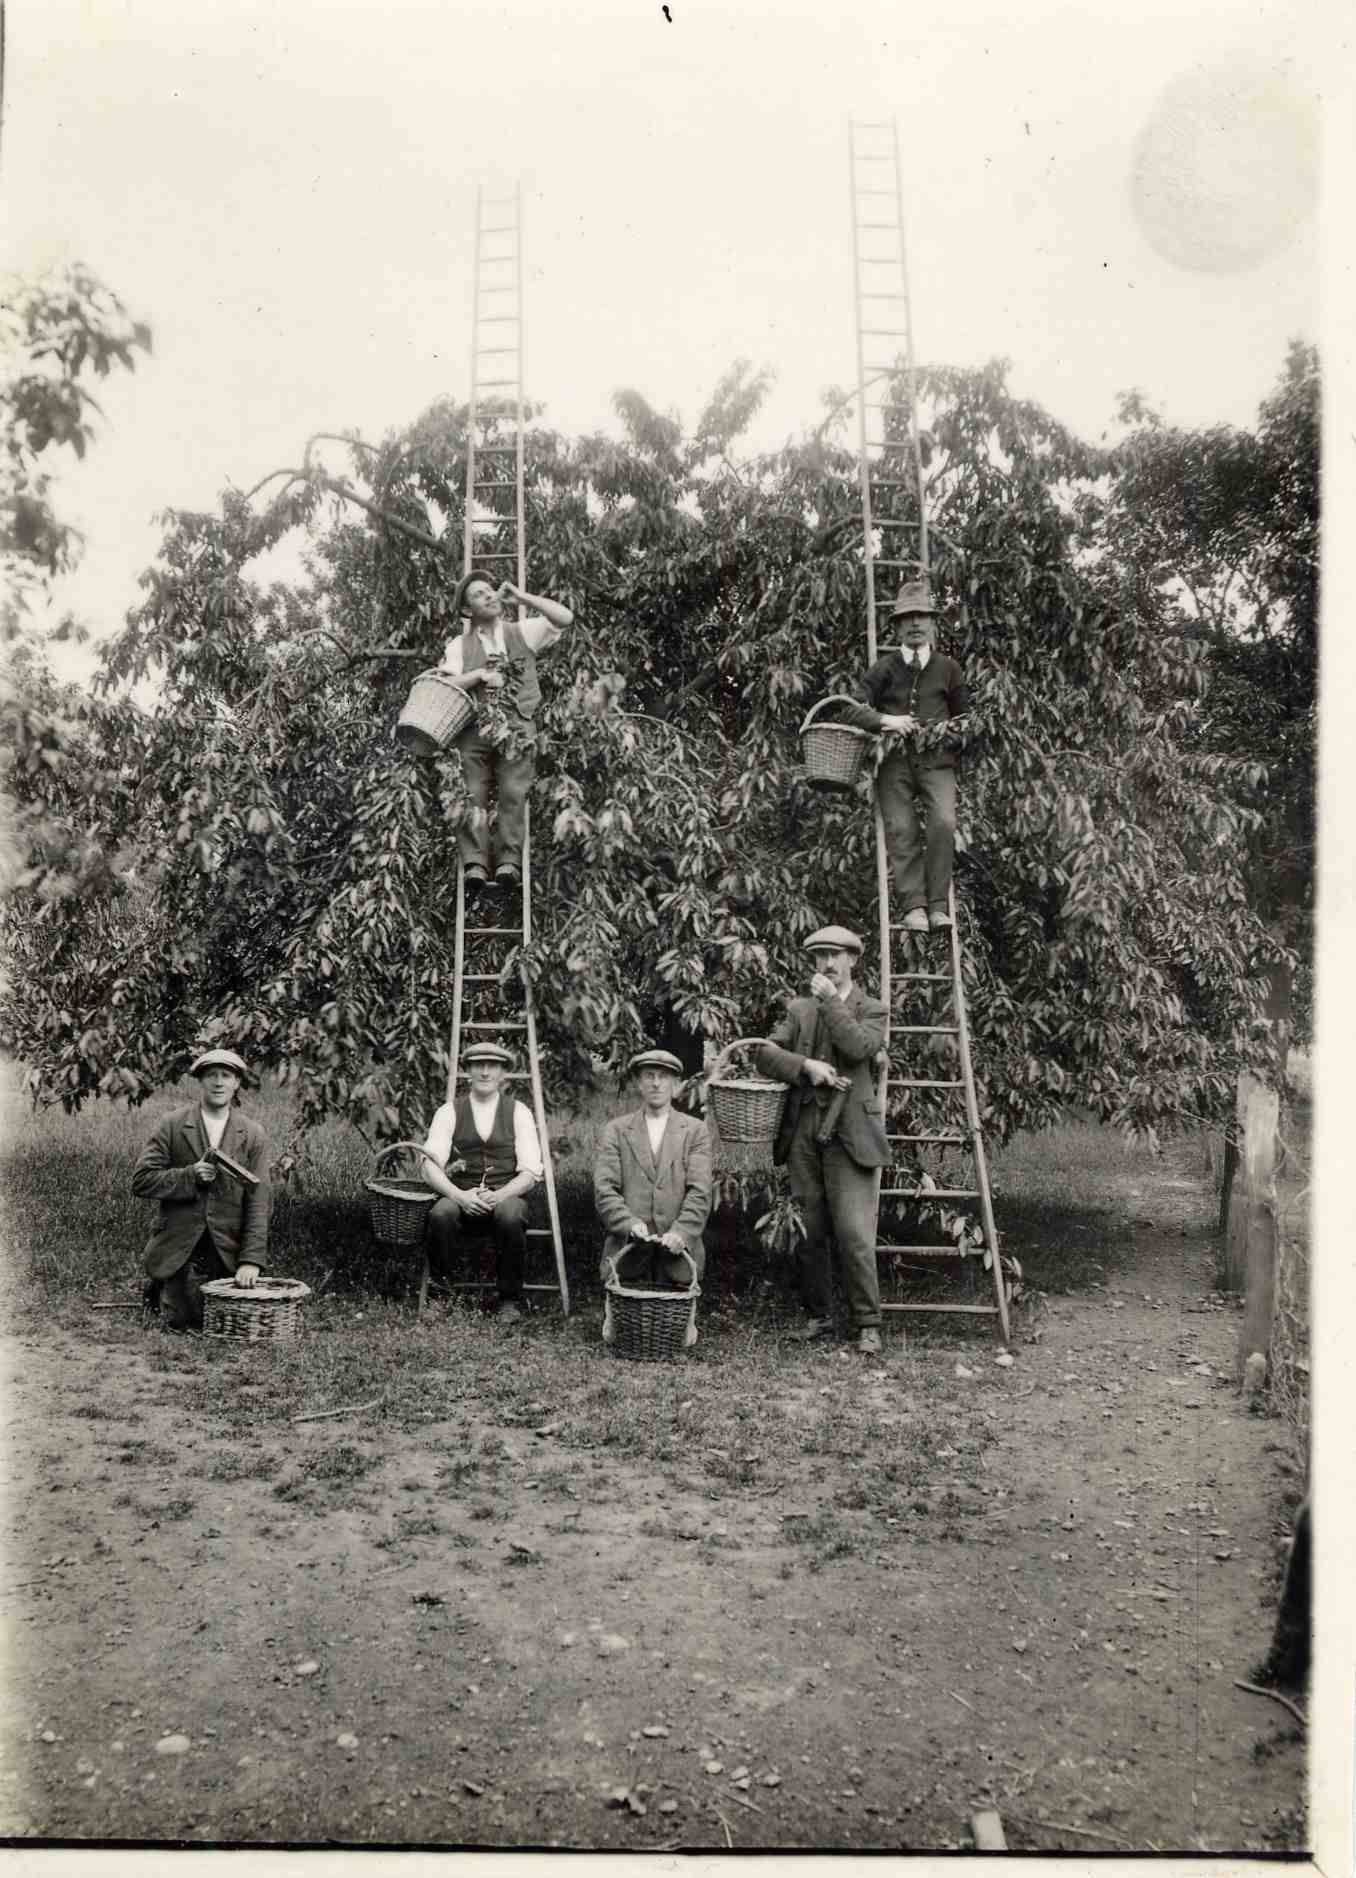 Archive photo shows cherry pickers in orchard ready to climb very tall ladders that tapered narrowly towards the top